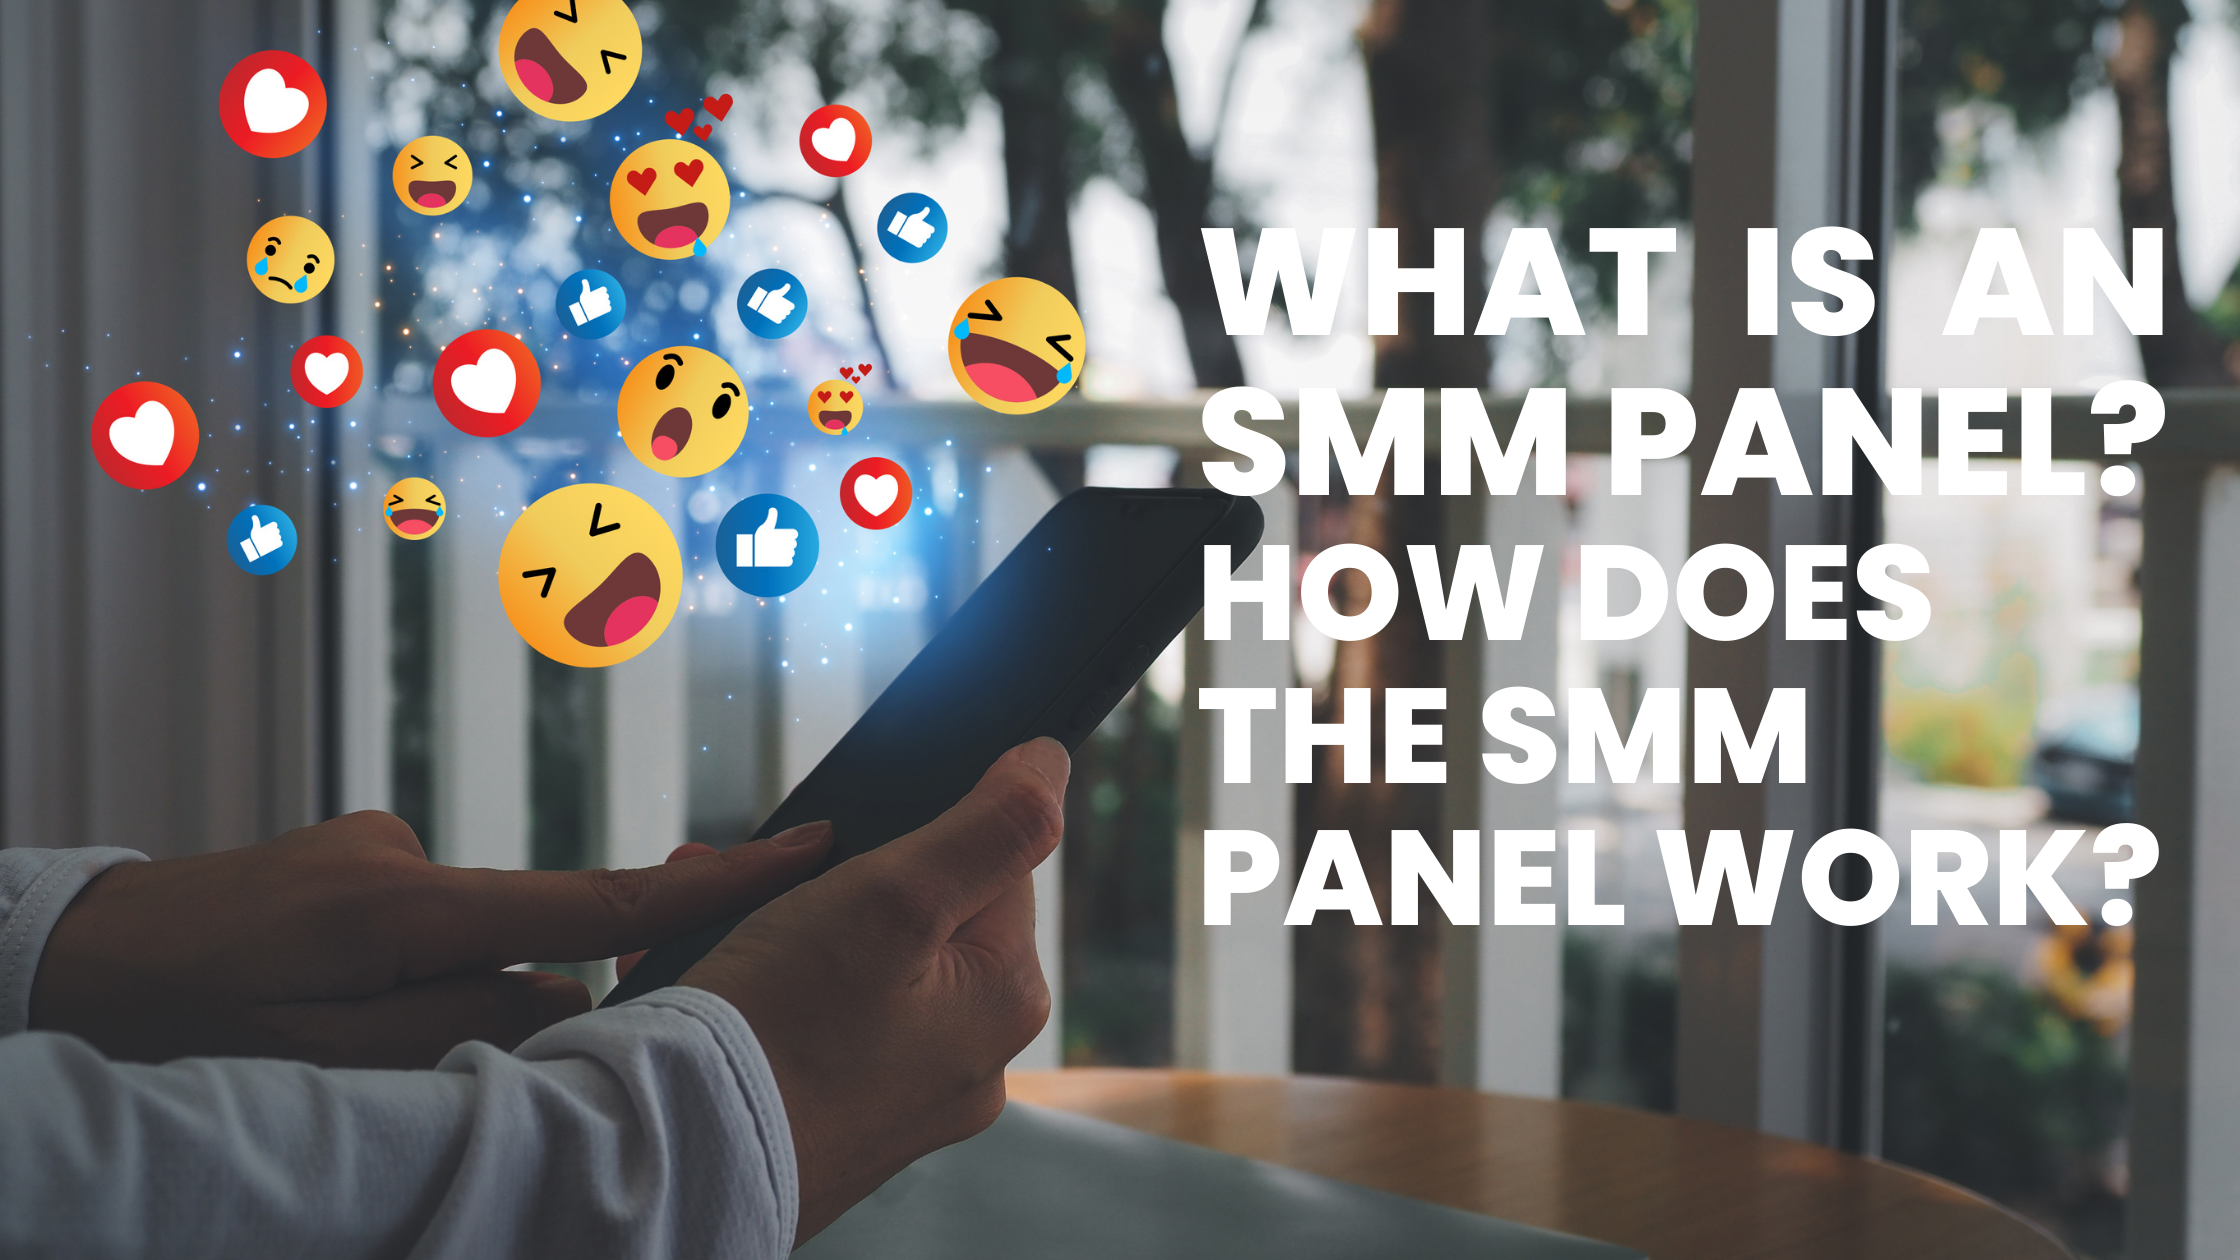 What is an SMM Panel? How does the SMM panel work?